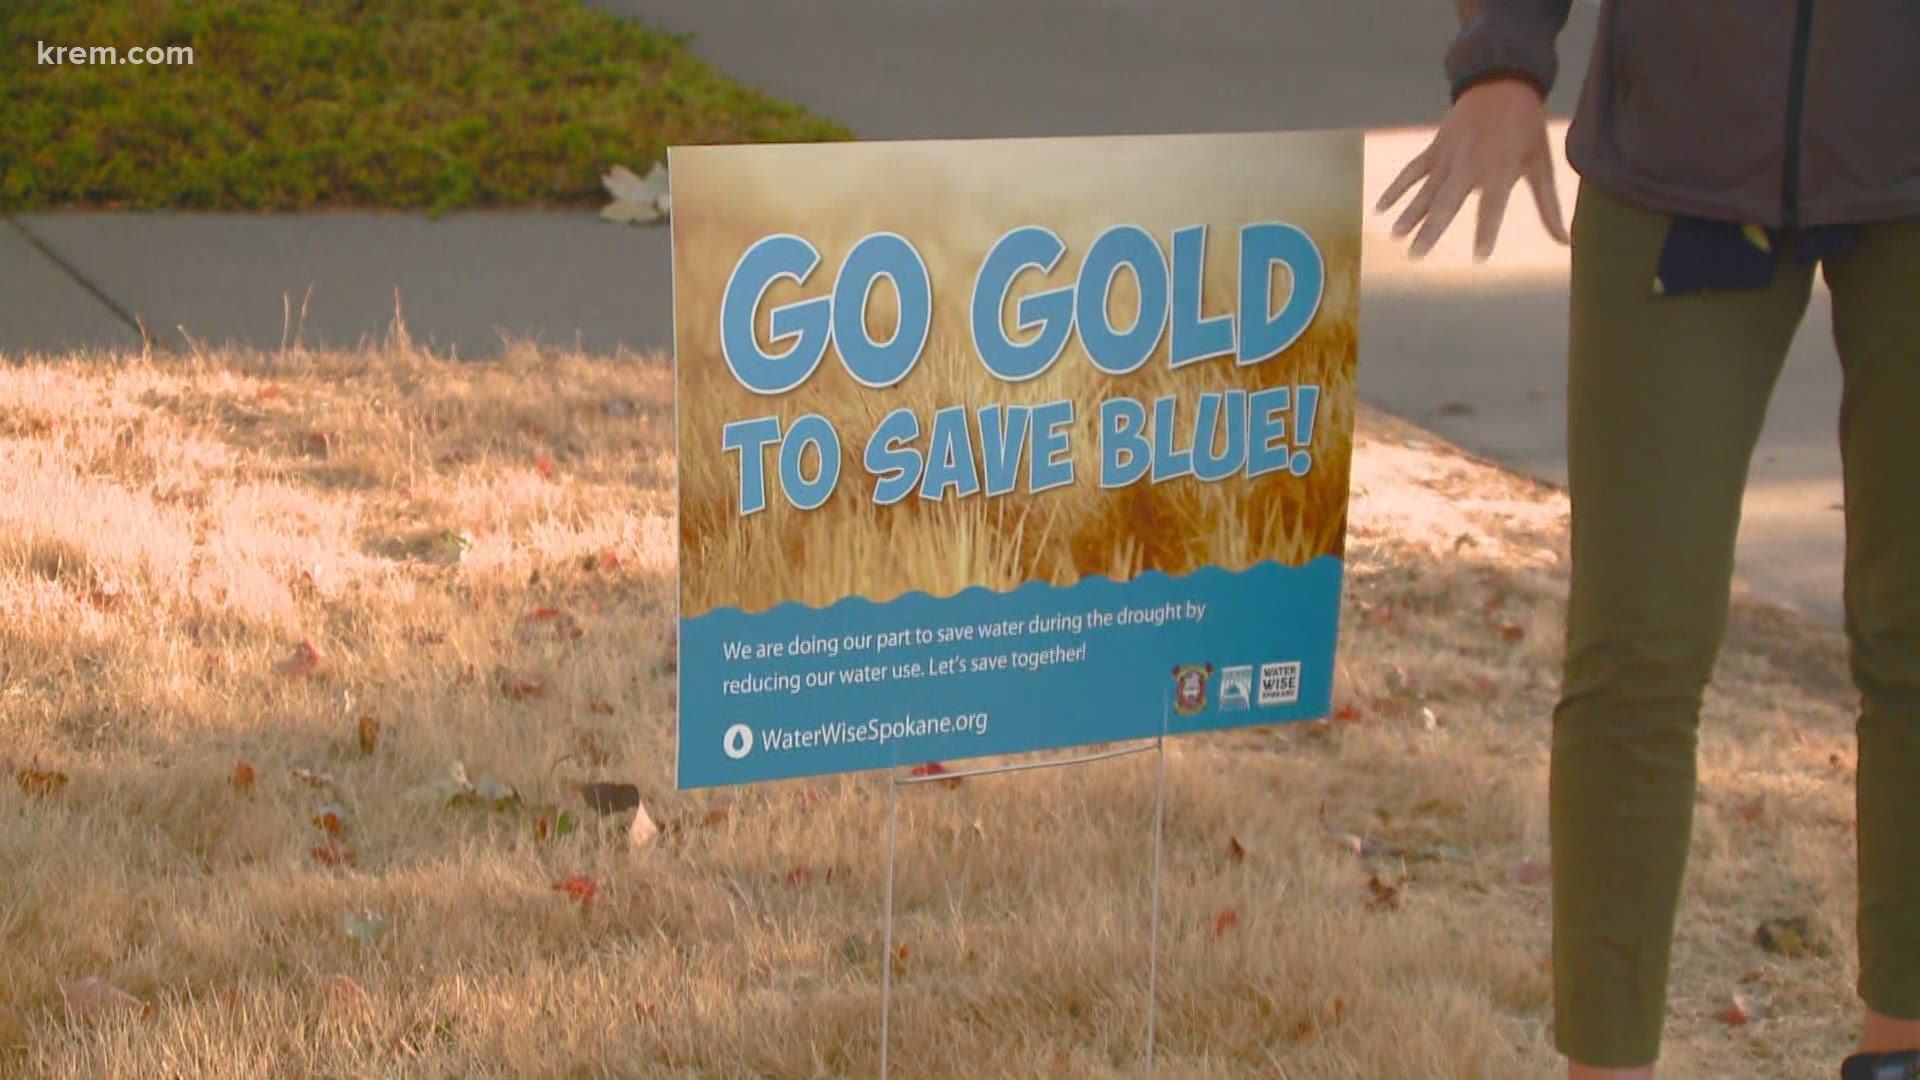 Governor Jay inslee declared the state in a drought emergency.